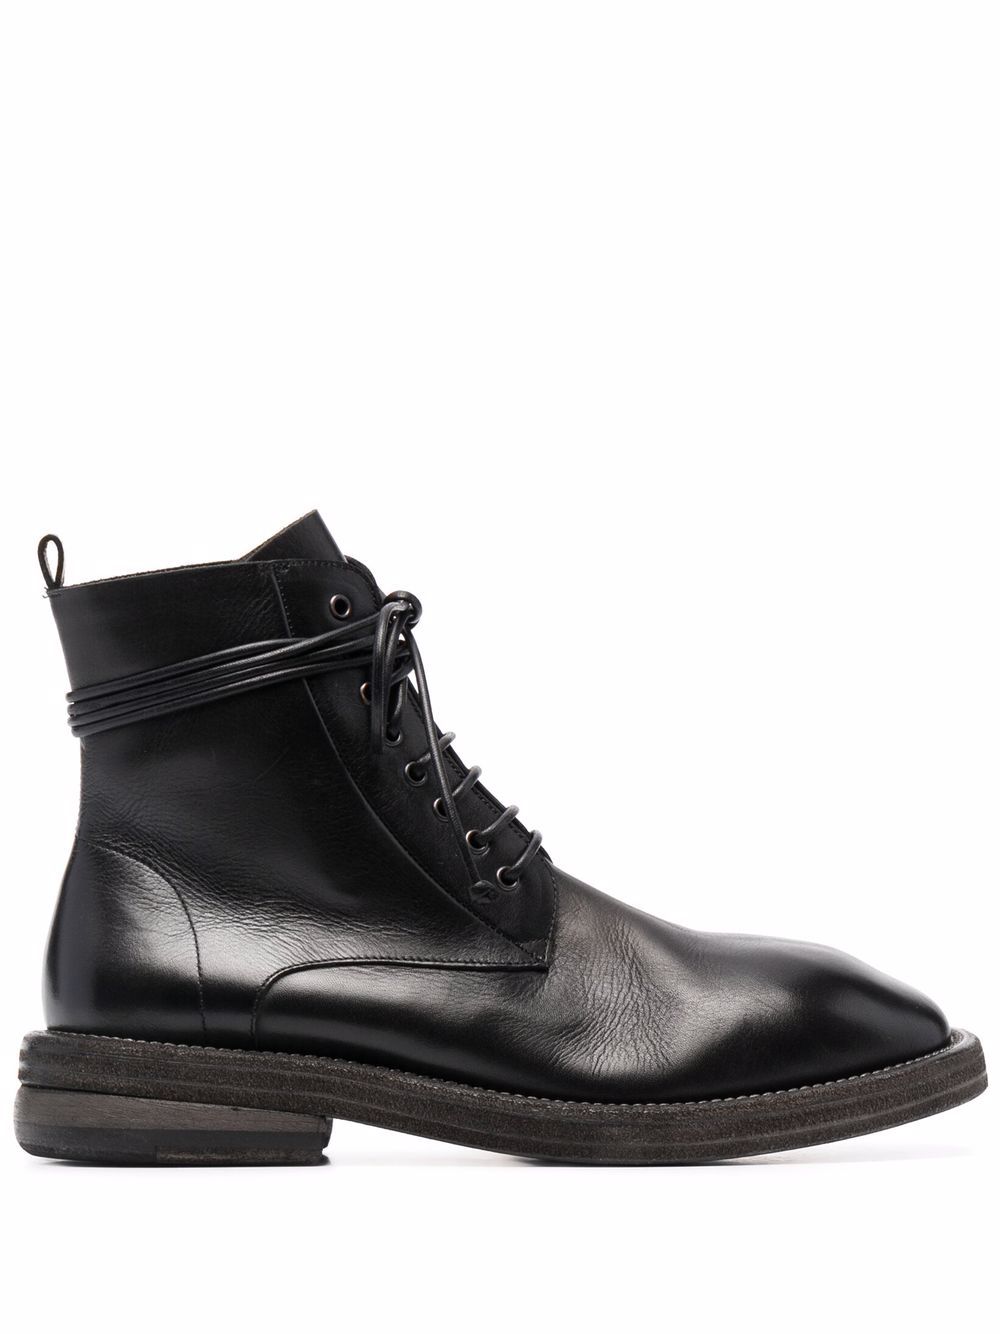 Marsèll Dodone lace-up Ankle Boots - Farfetch